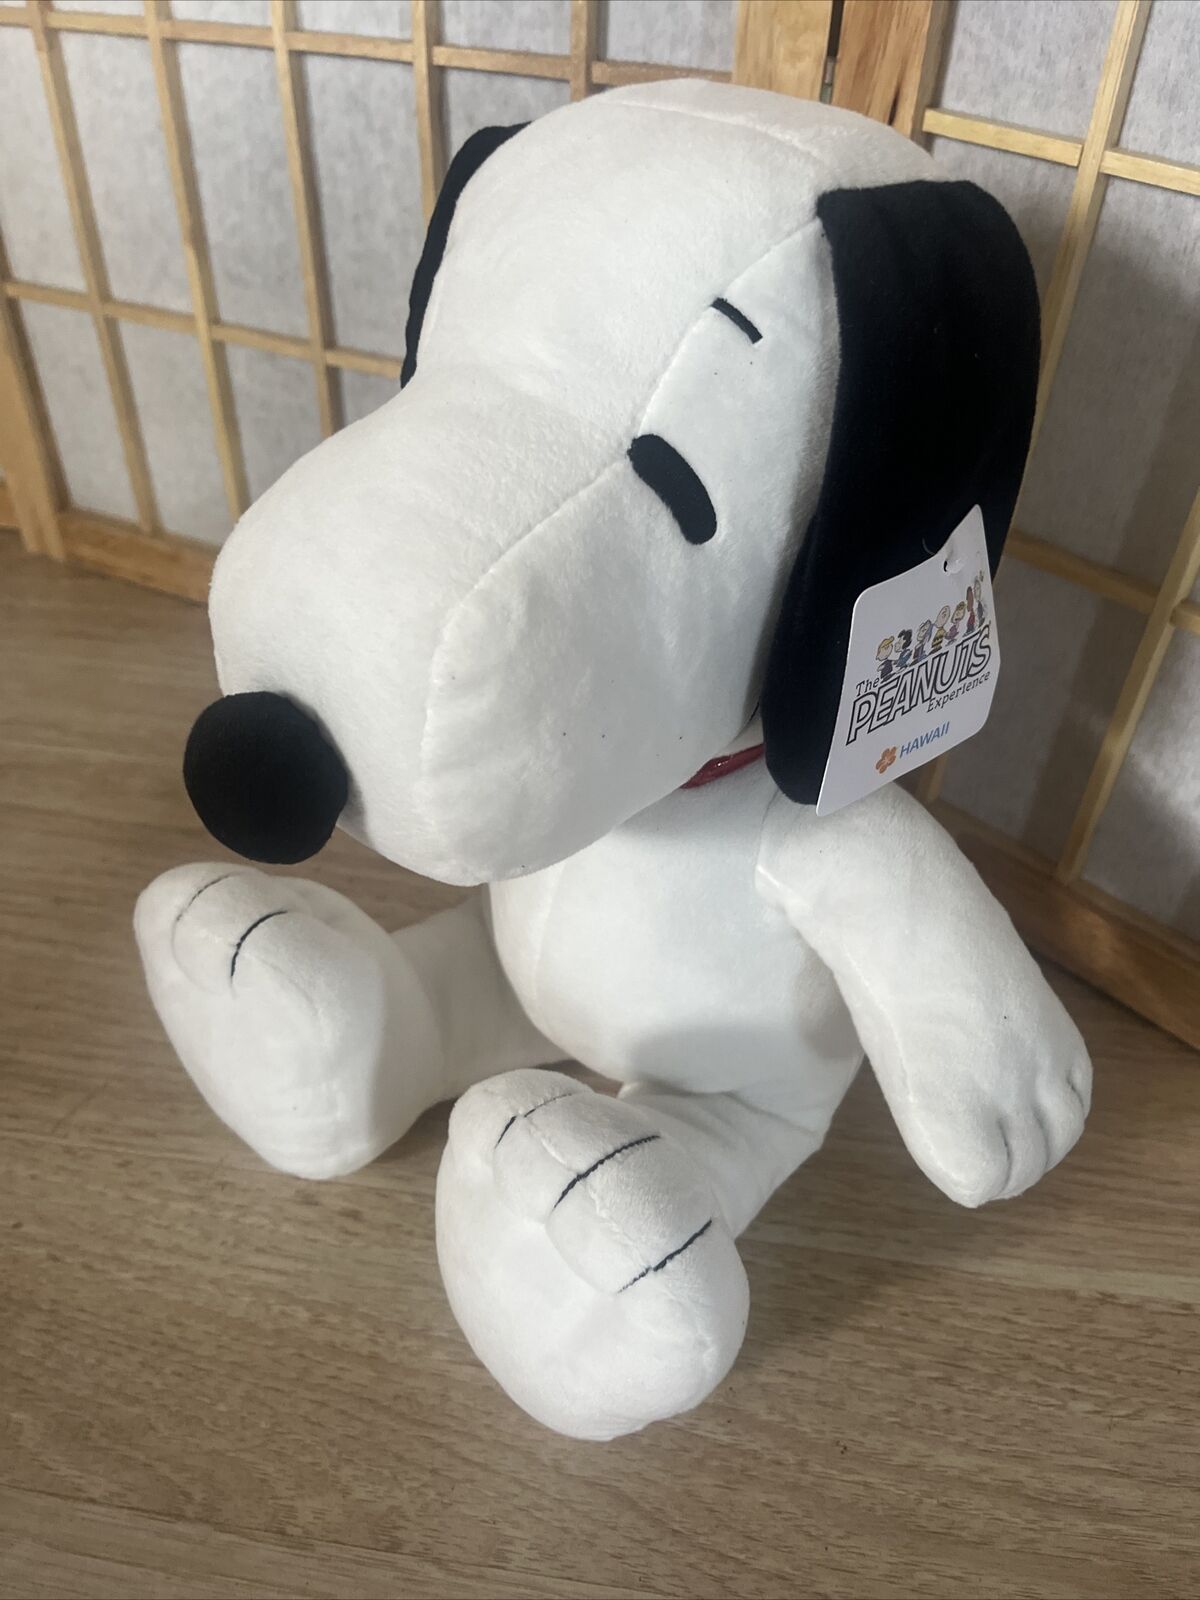 Hawaii Exclusive Original Snoopy Plush from A Peanuts Adventure 16” New w/tag